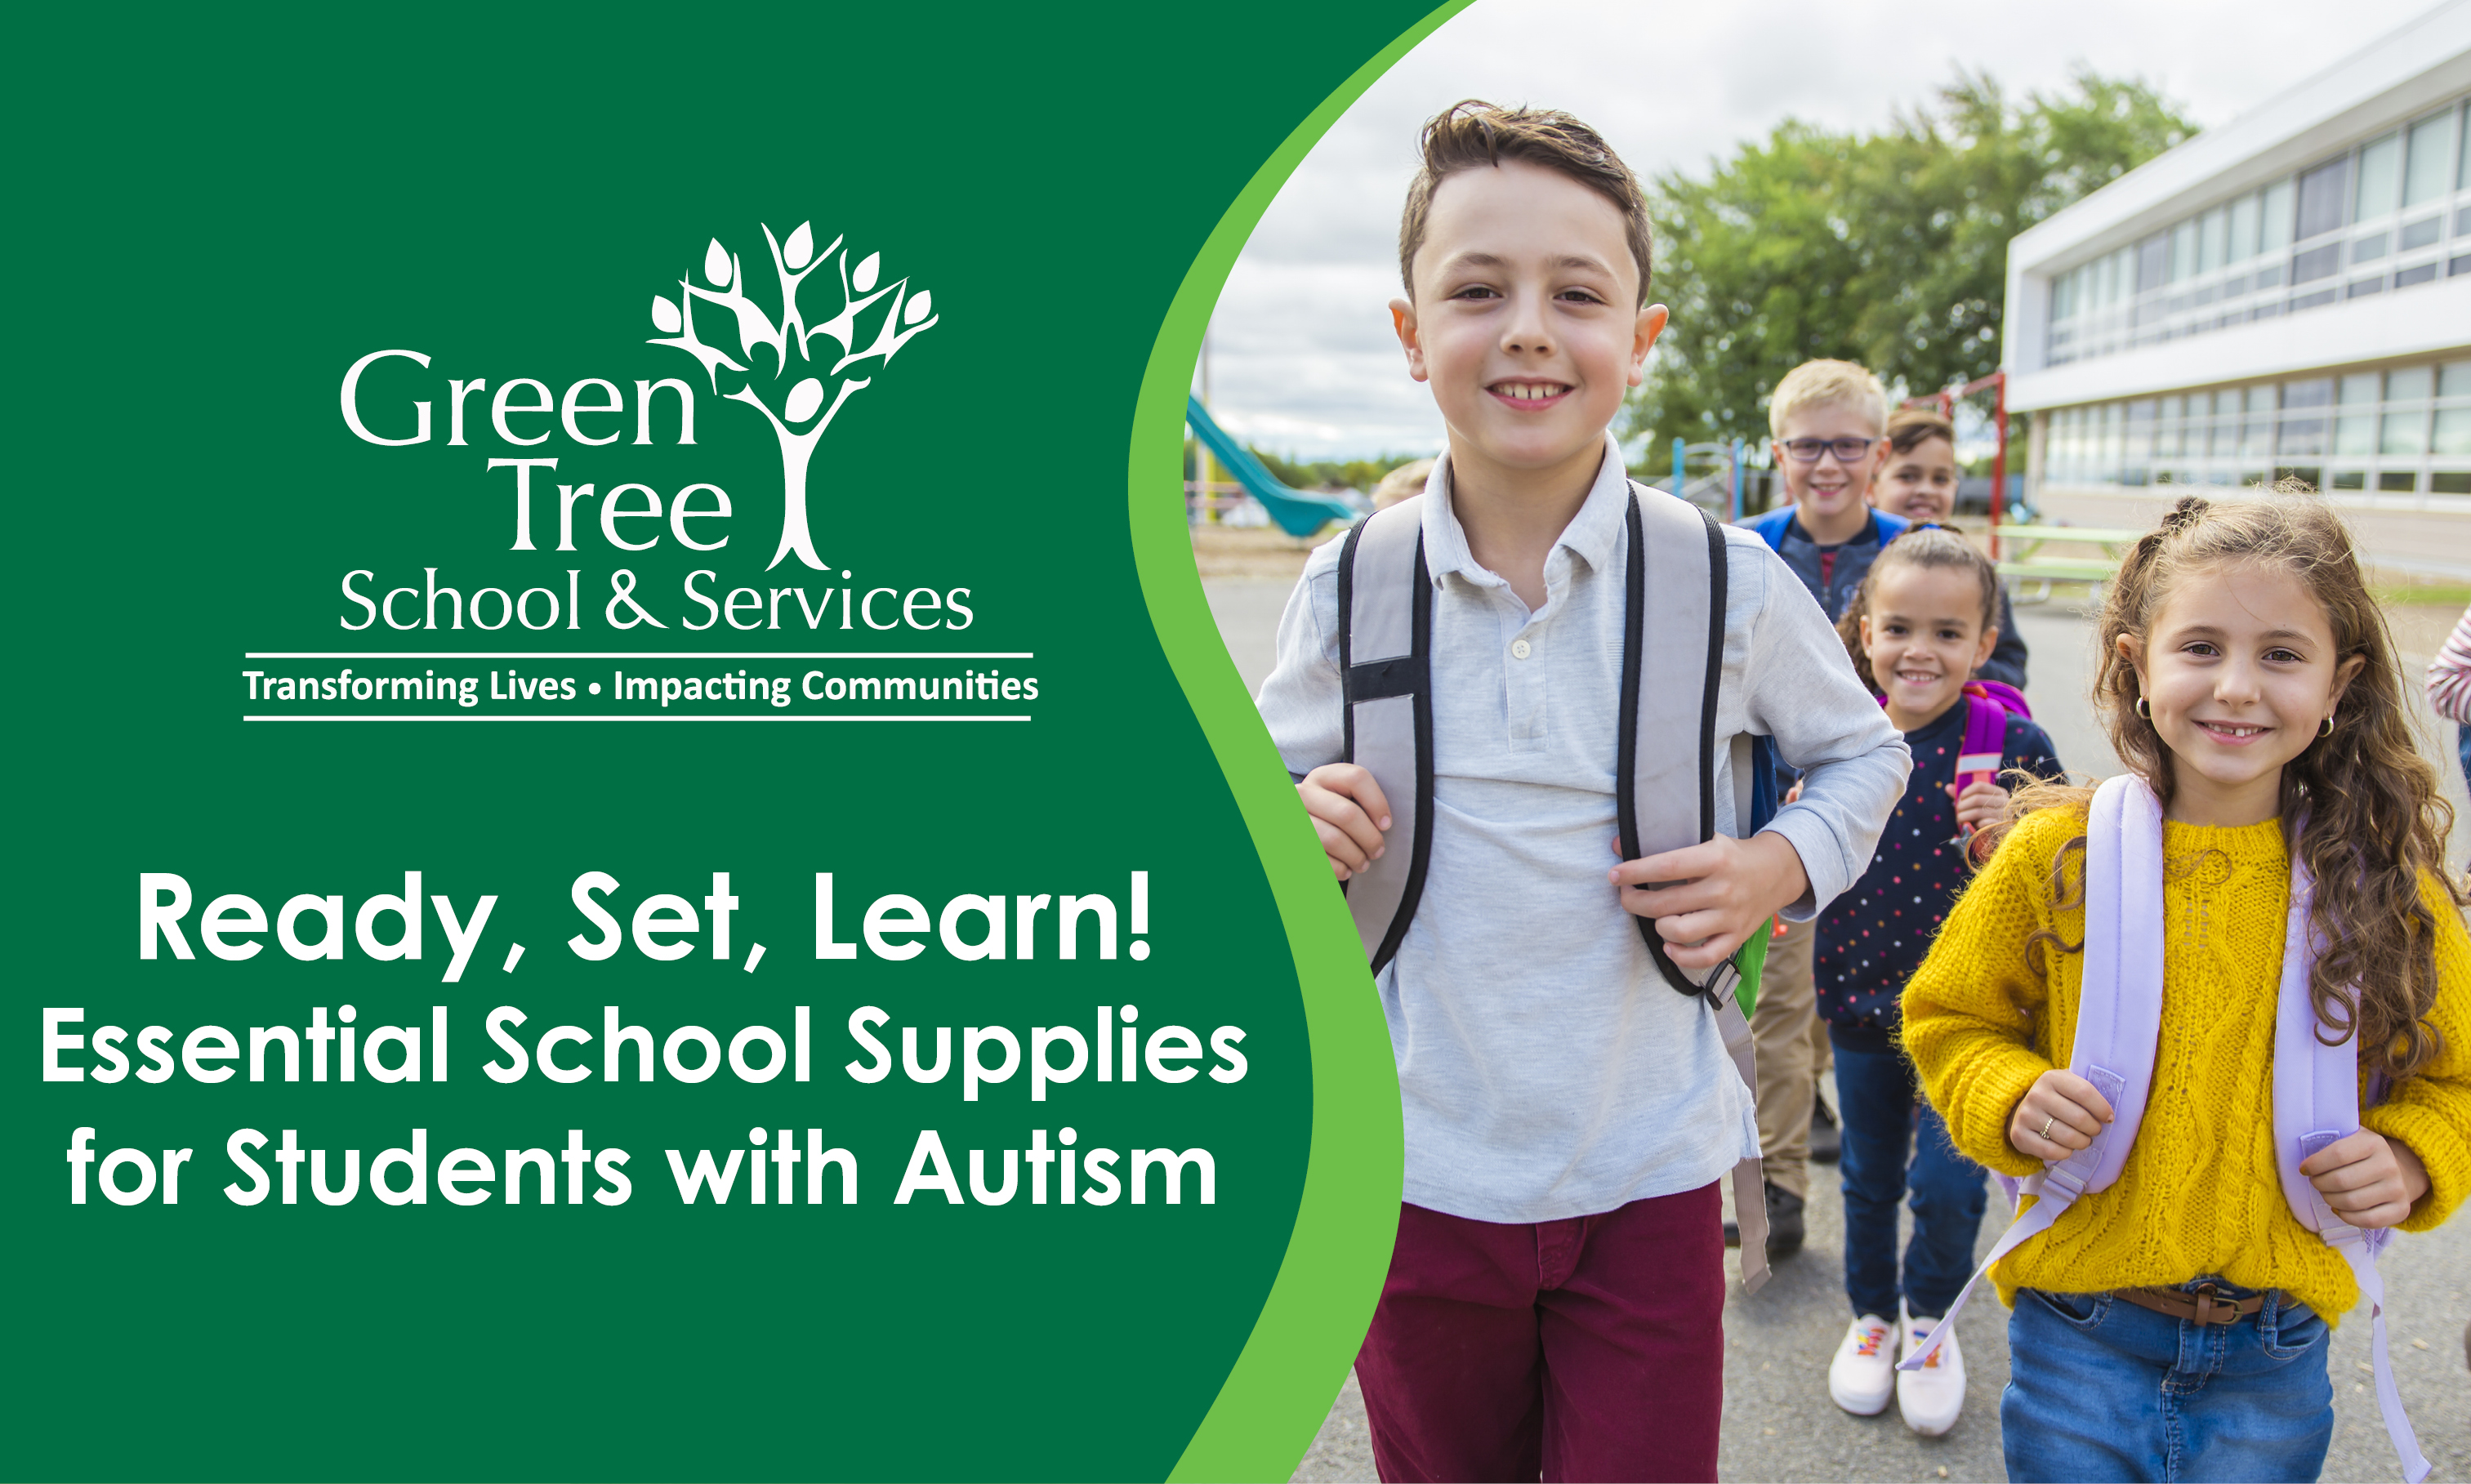 Ready, Set, Learn! Essential School Supplies for Students with Autism